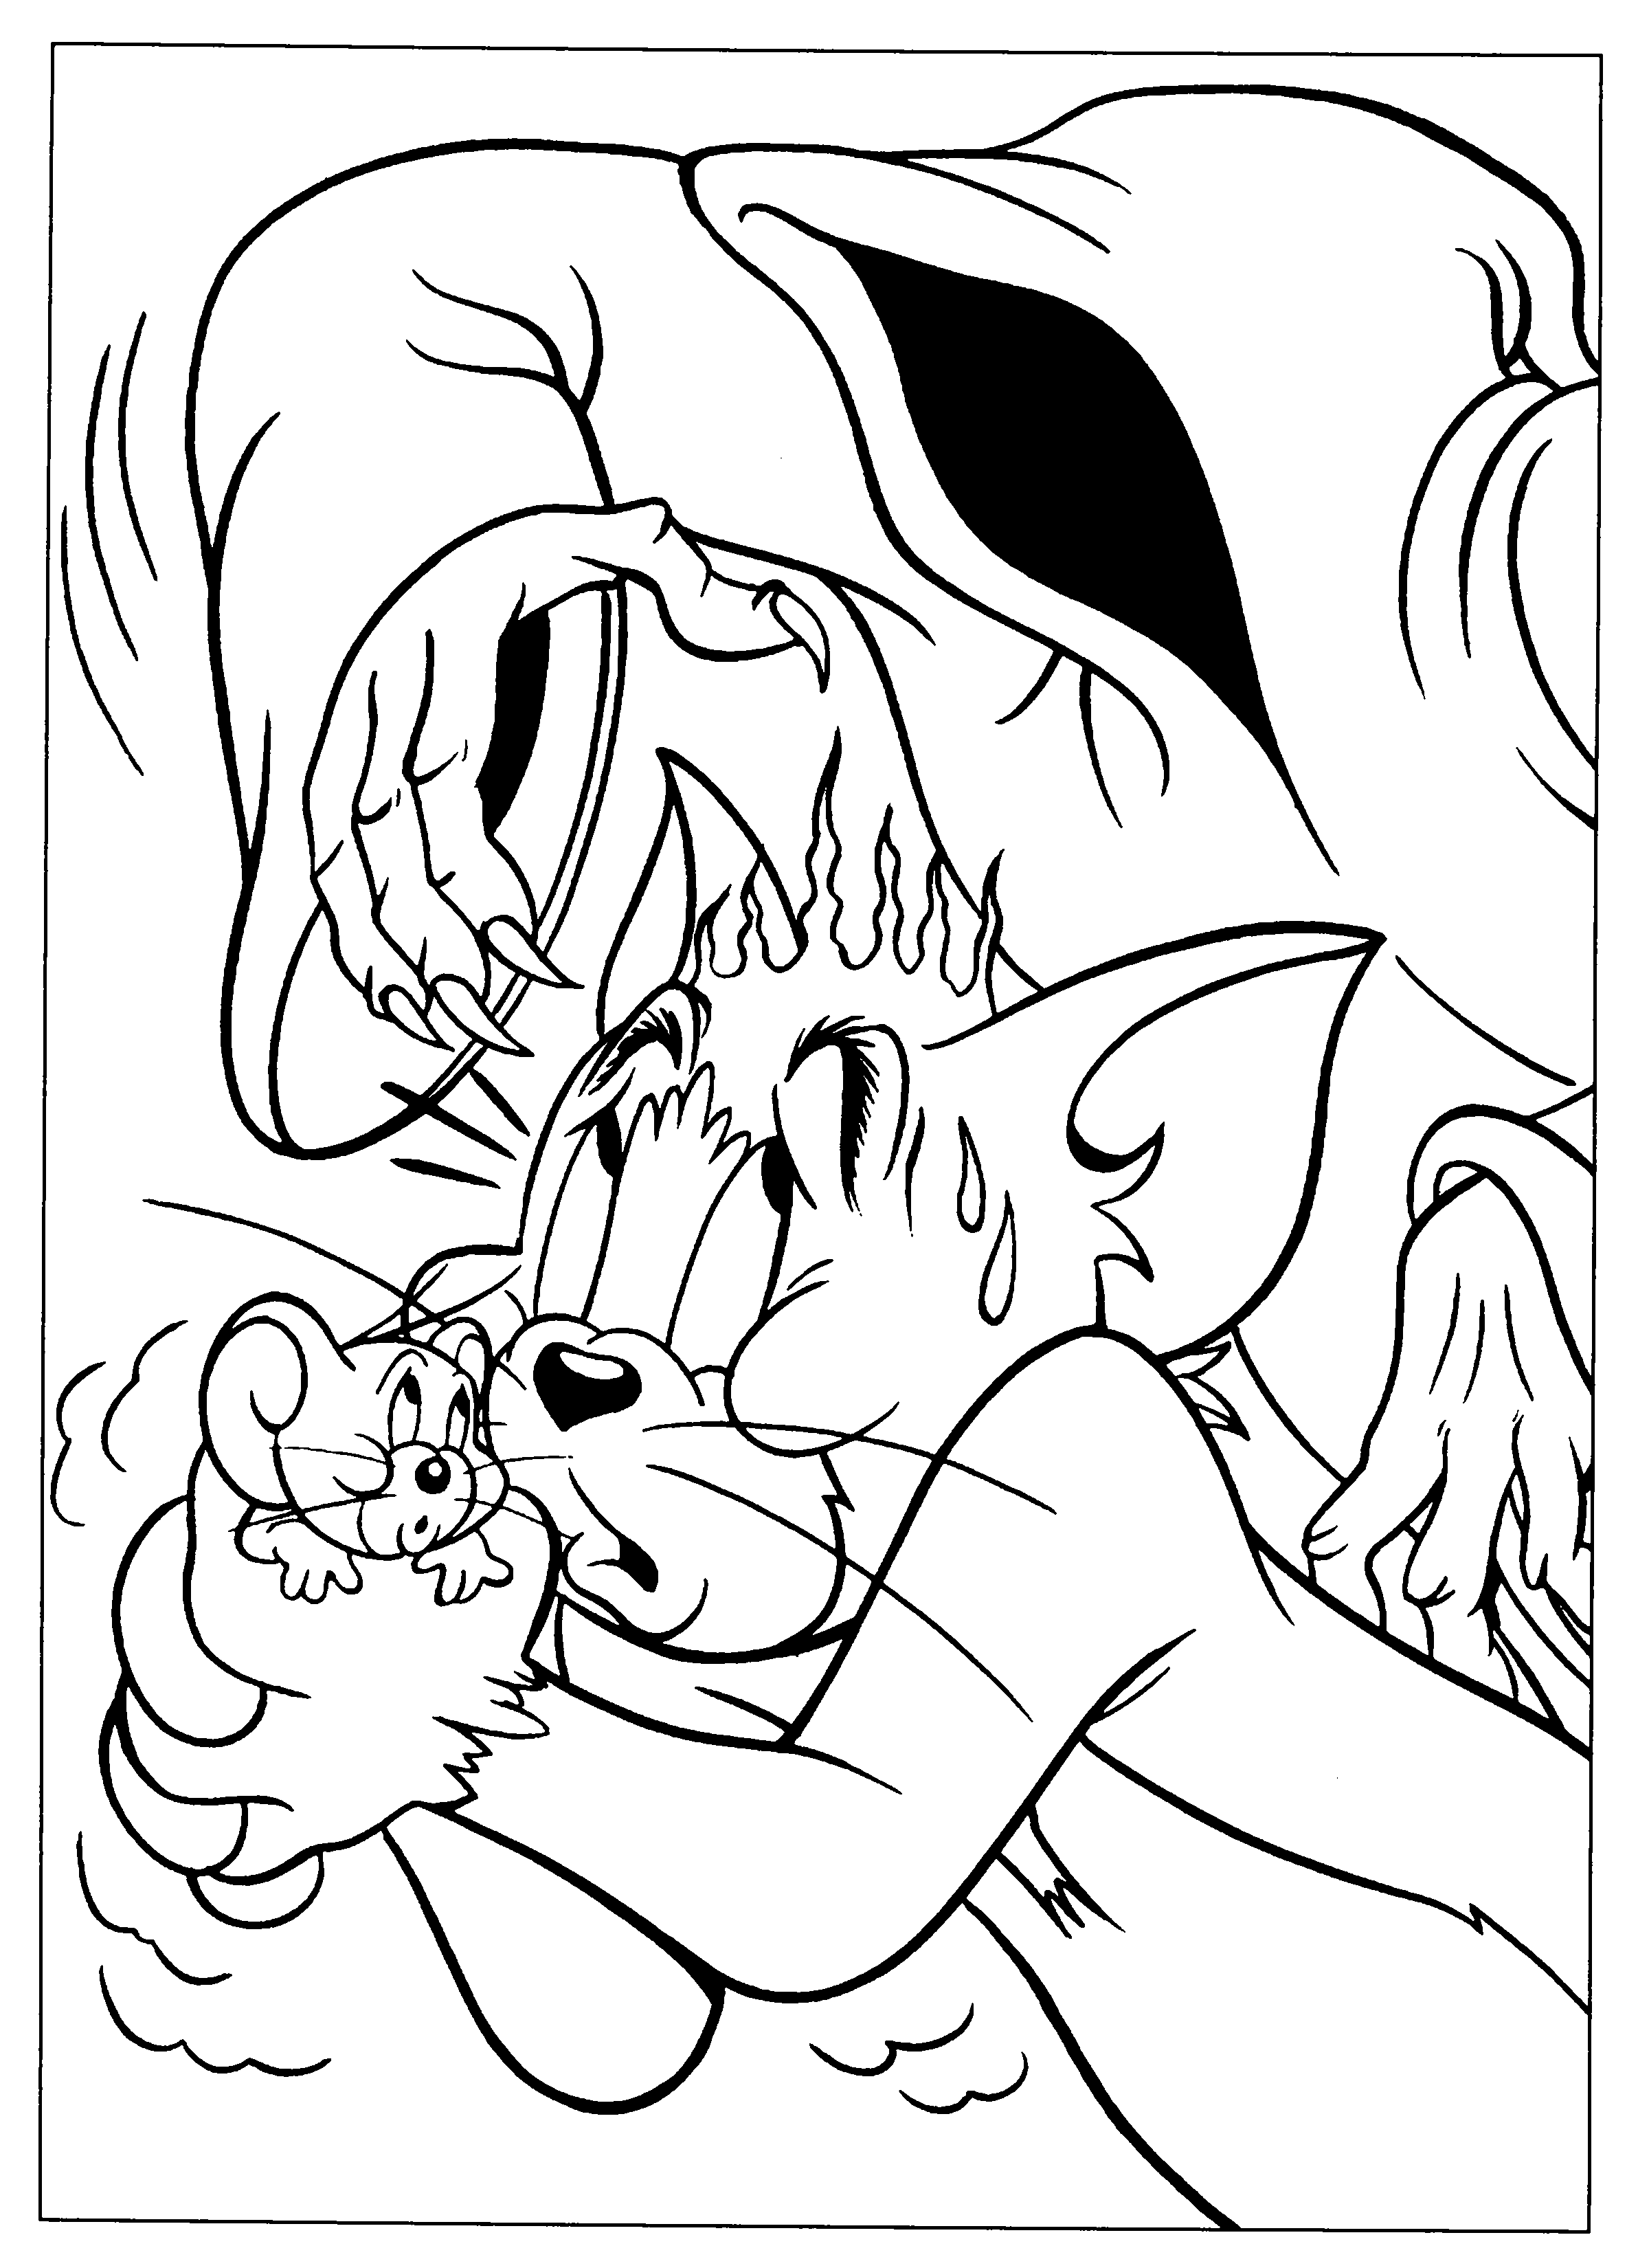 Tom and jerry Coloring Pages   Coloringpages1001.com